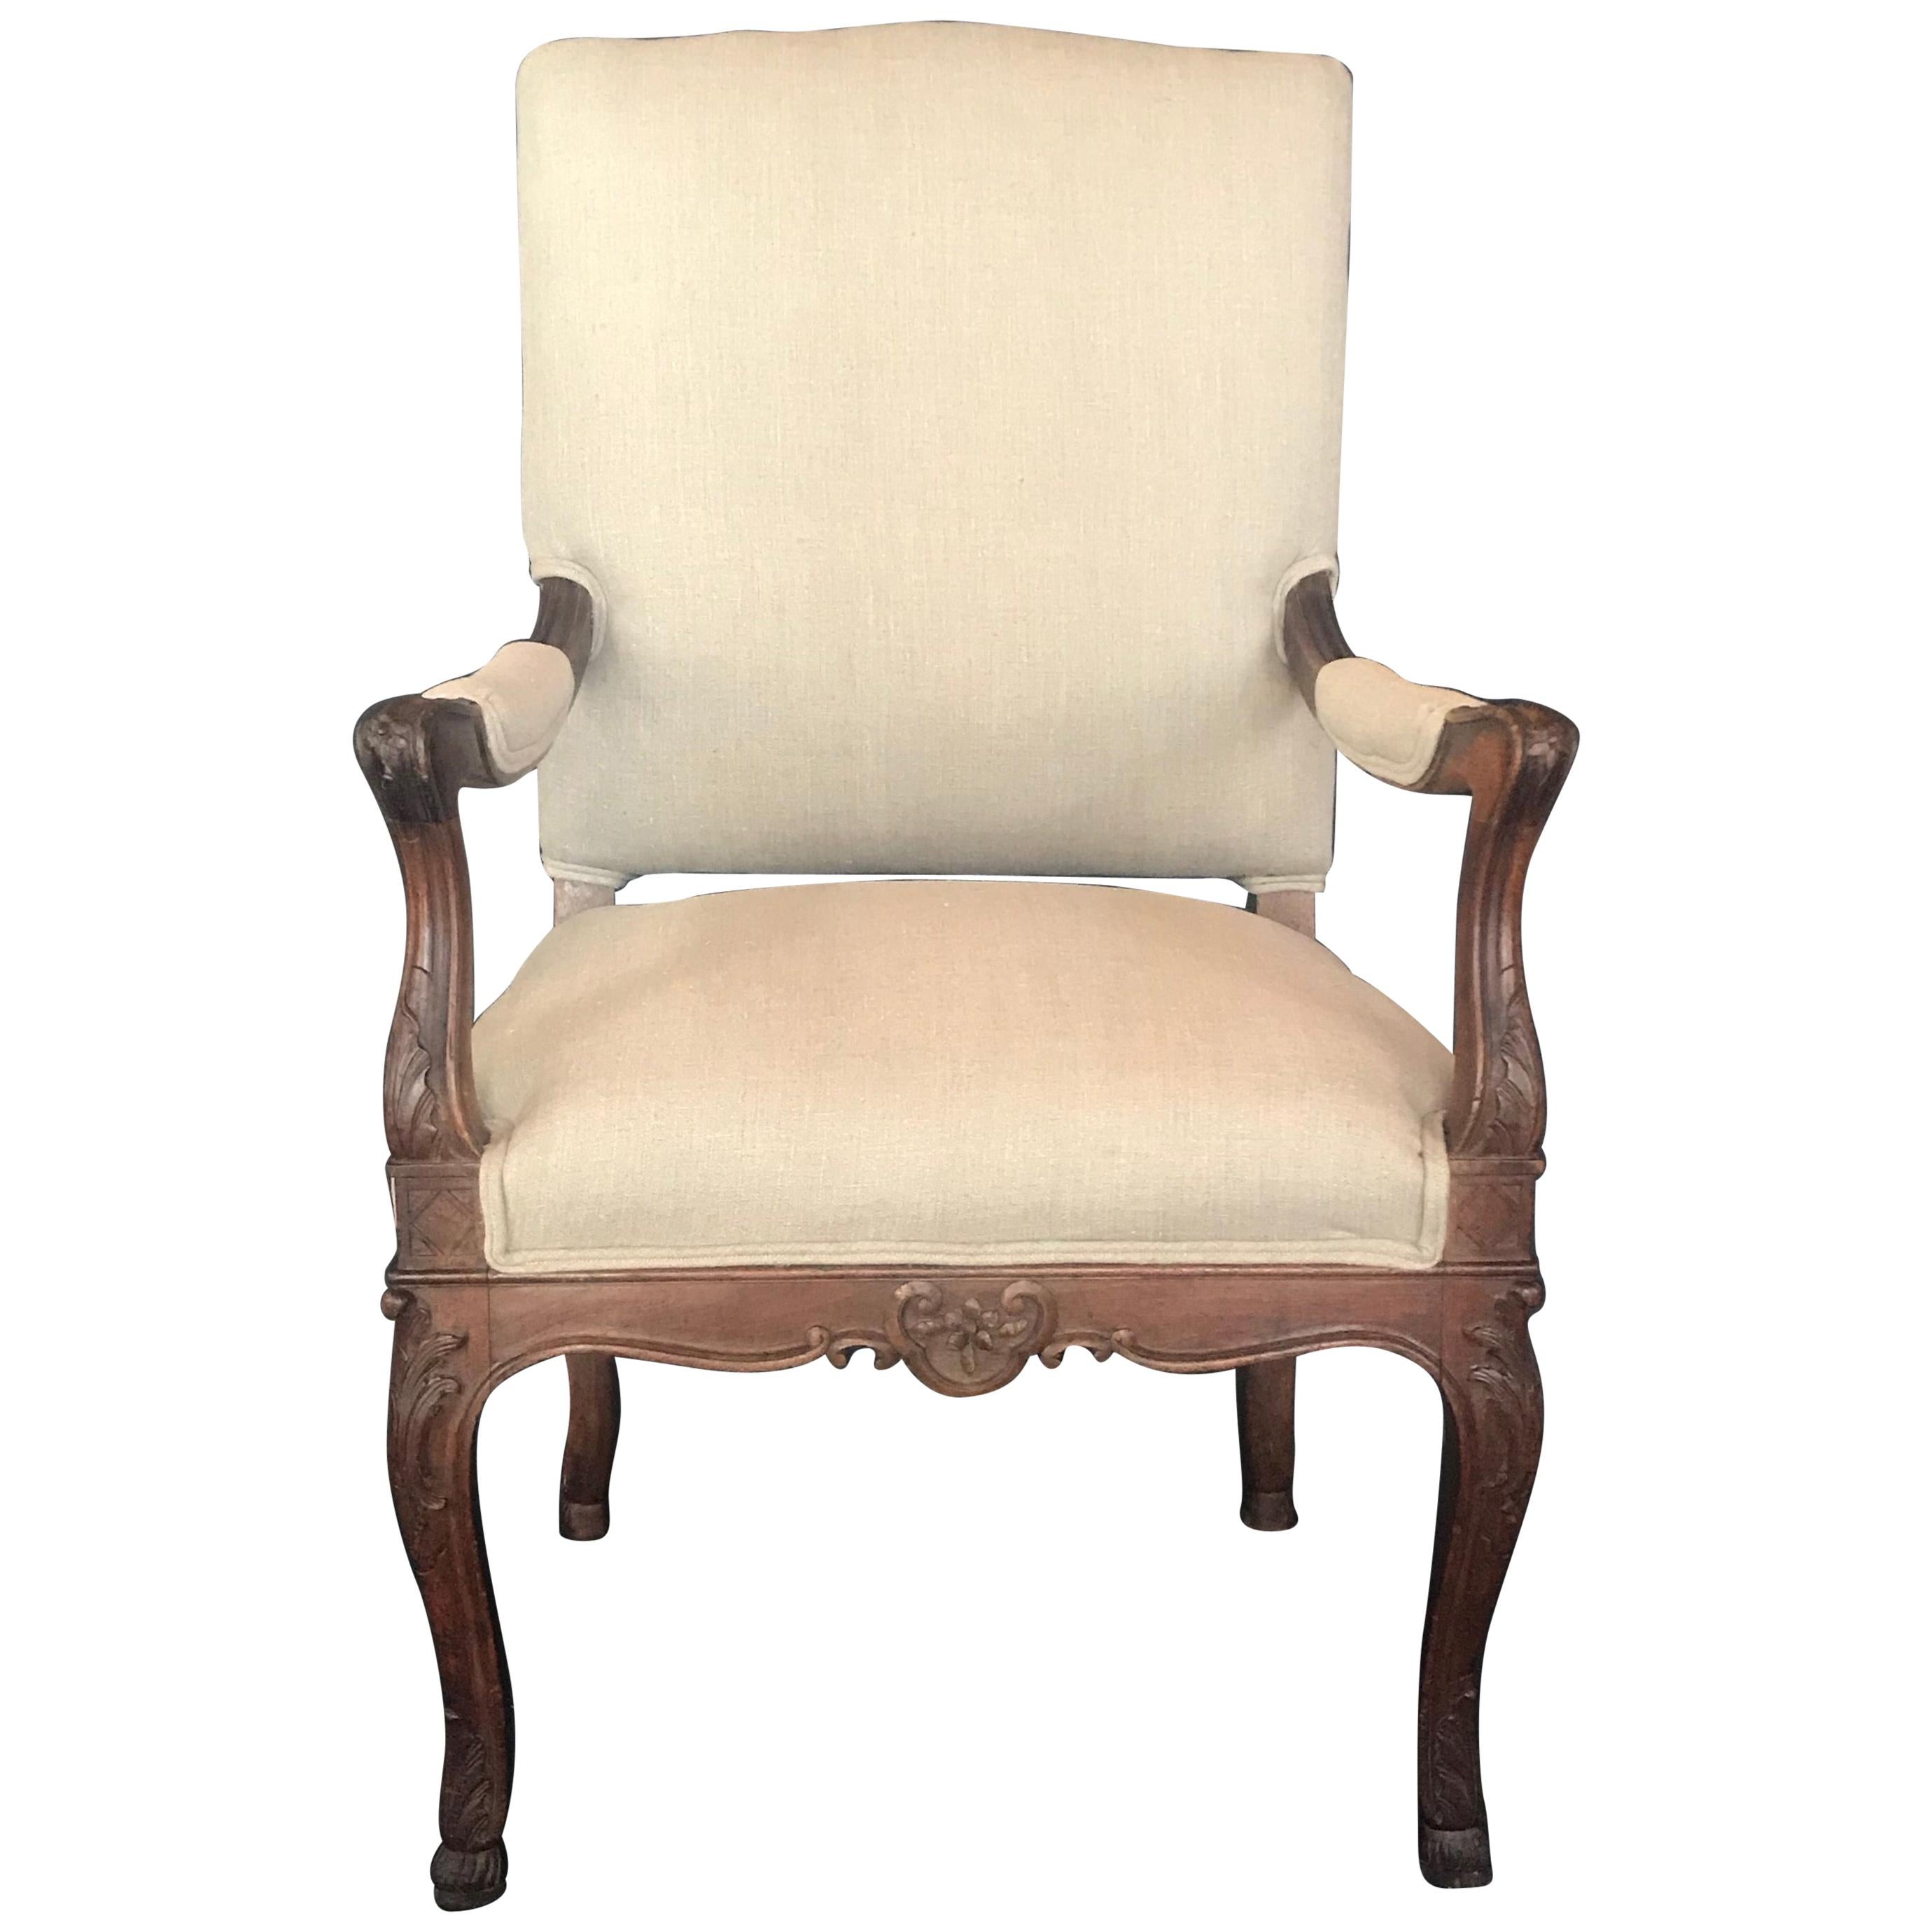 19th Century French Carved Regency Style Walnut Chair with Scrolled Arms